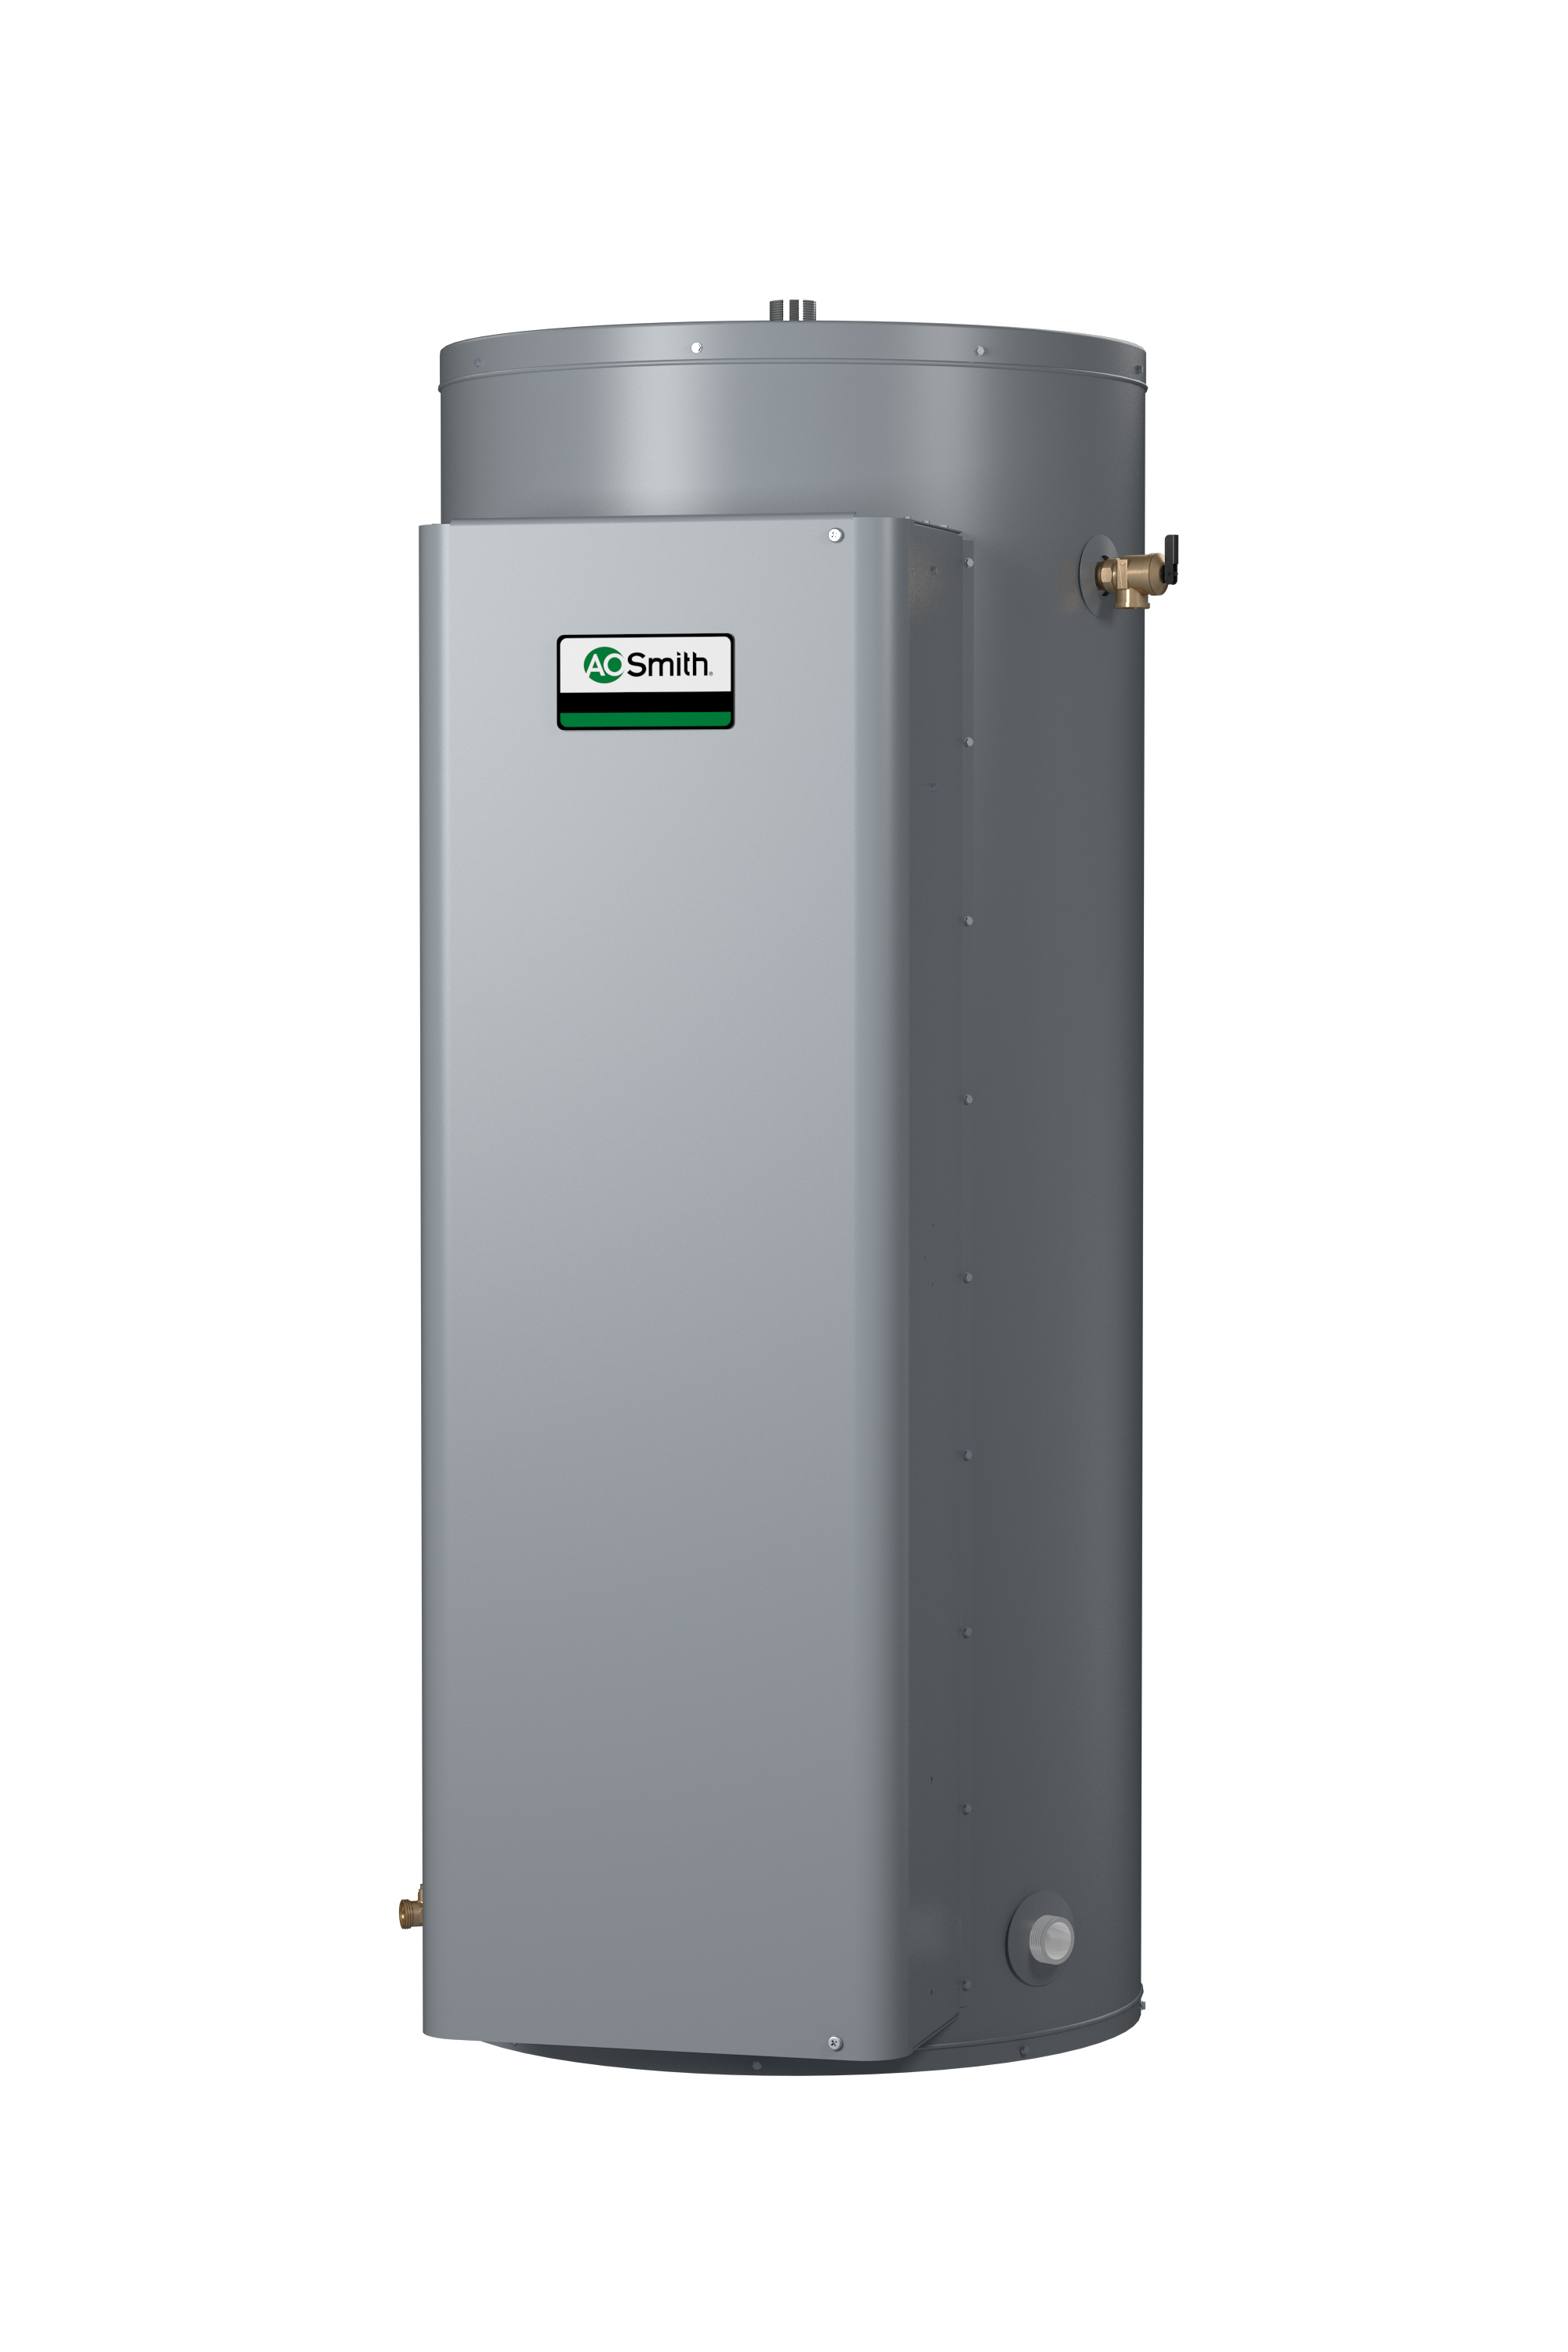 AO SMITH DRE-120-24: 119 GALLON, 24.0KW, 208 VOLT, 115.4 AMPS, 1 PHASE, 6 ELEMENT, COMMERCIAL ELECTRIC WATER HEATER, GOLD SERIES